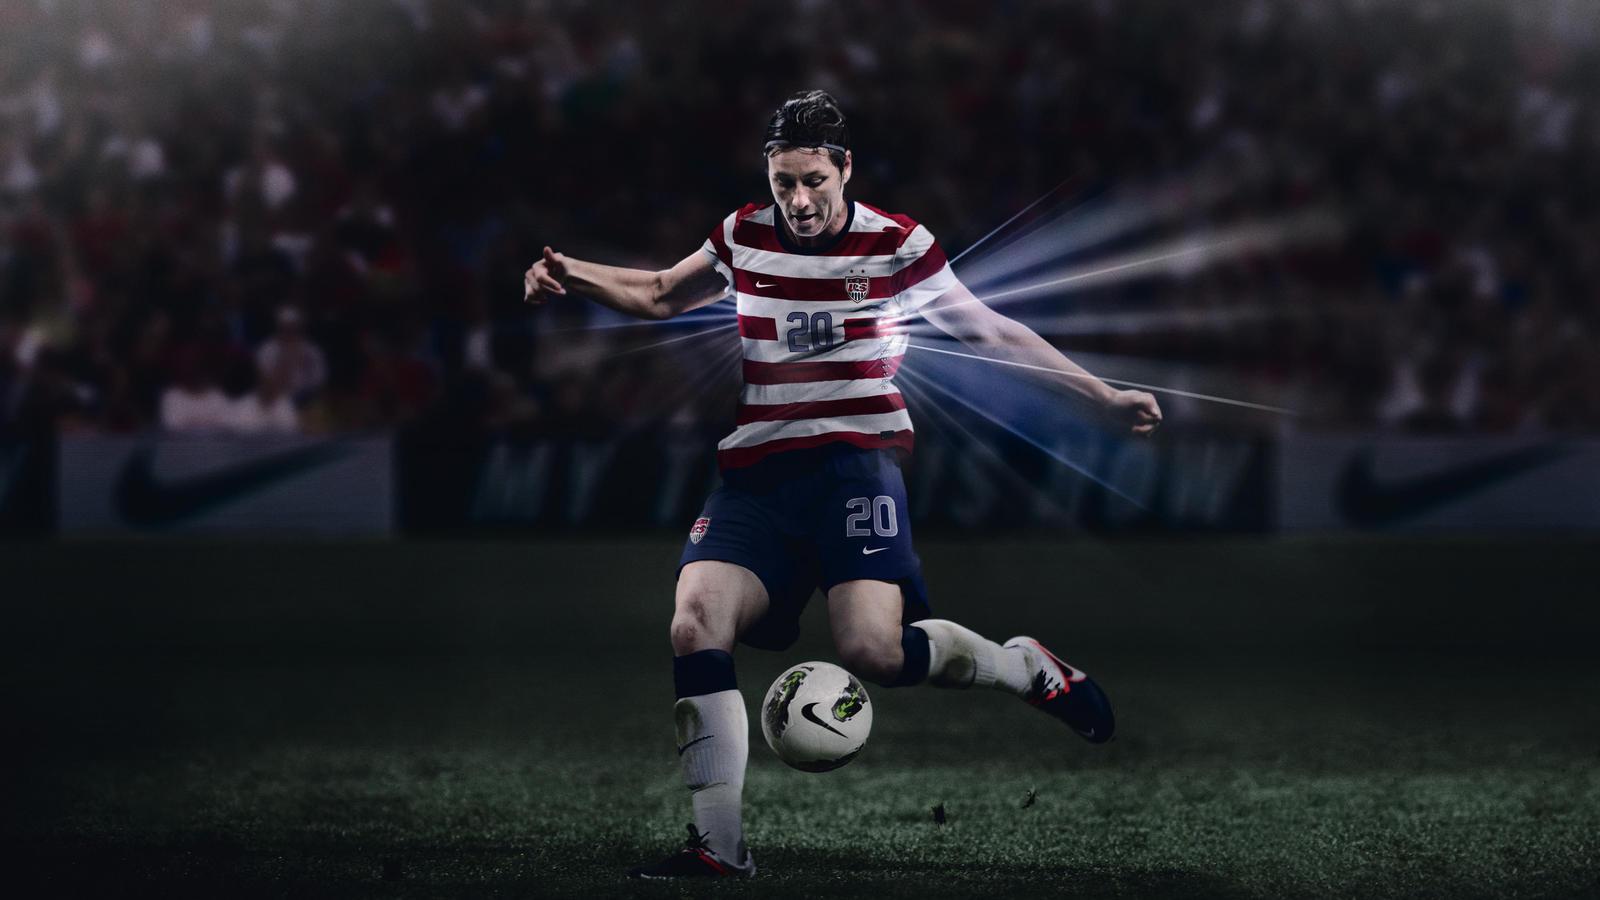 Abby Wambach named 2012 Women's World Player of the Year